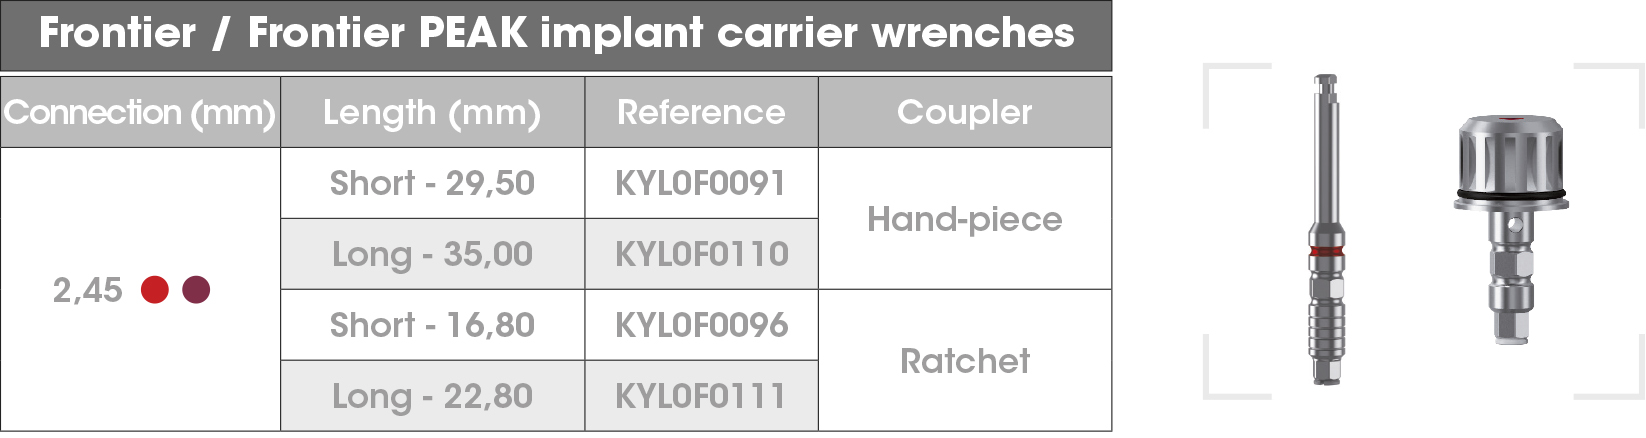 Frontier carrier wrenches